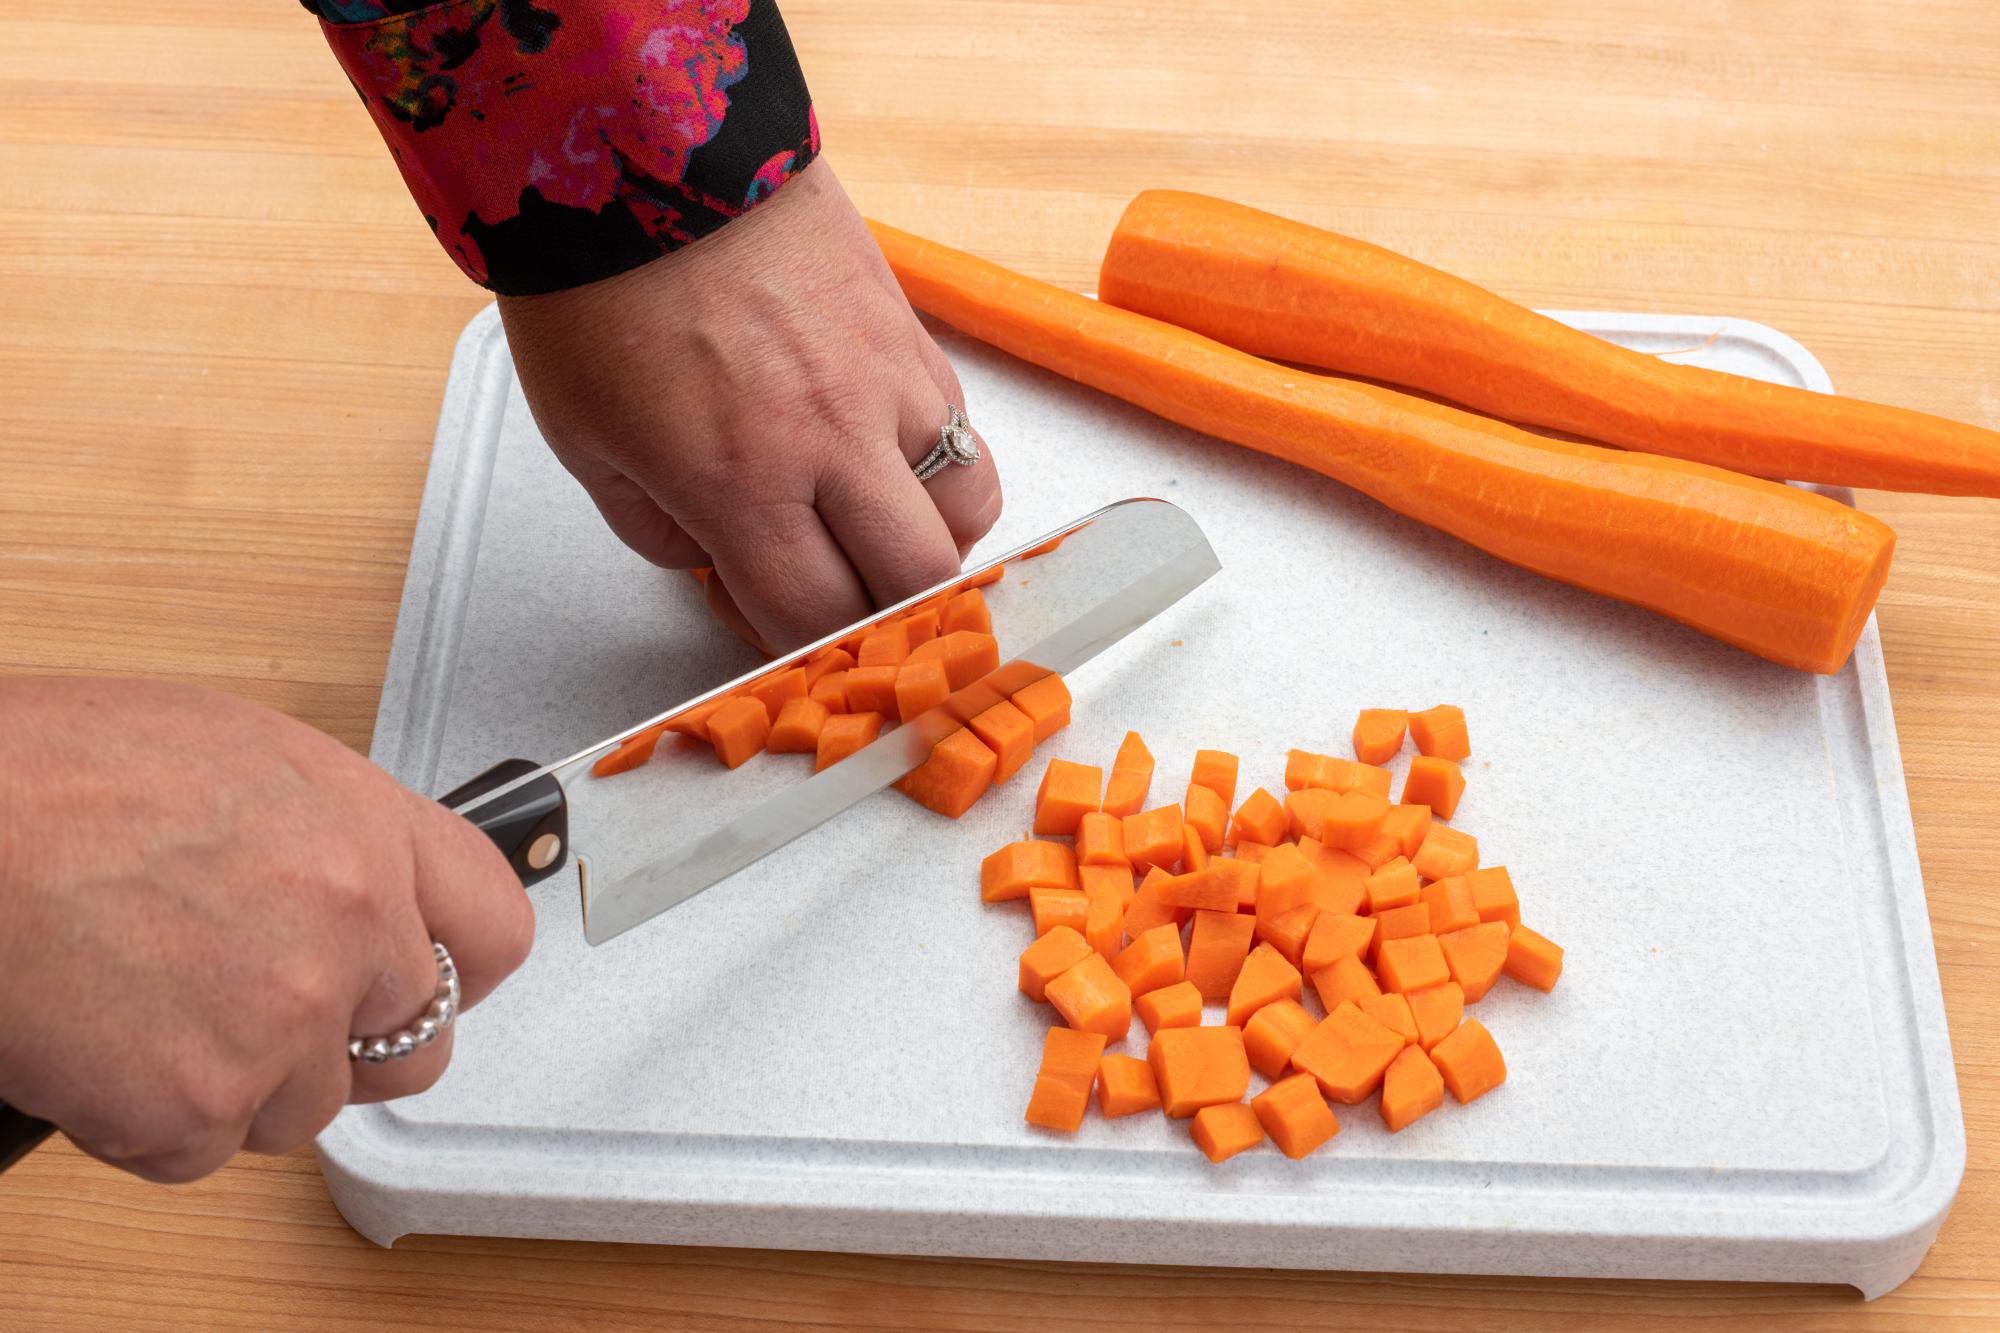 Chopping carrots with a Santoku.